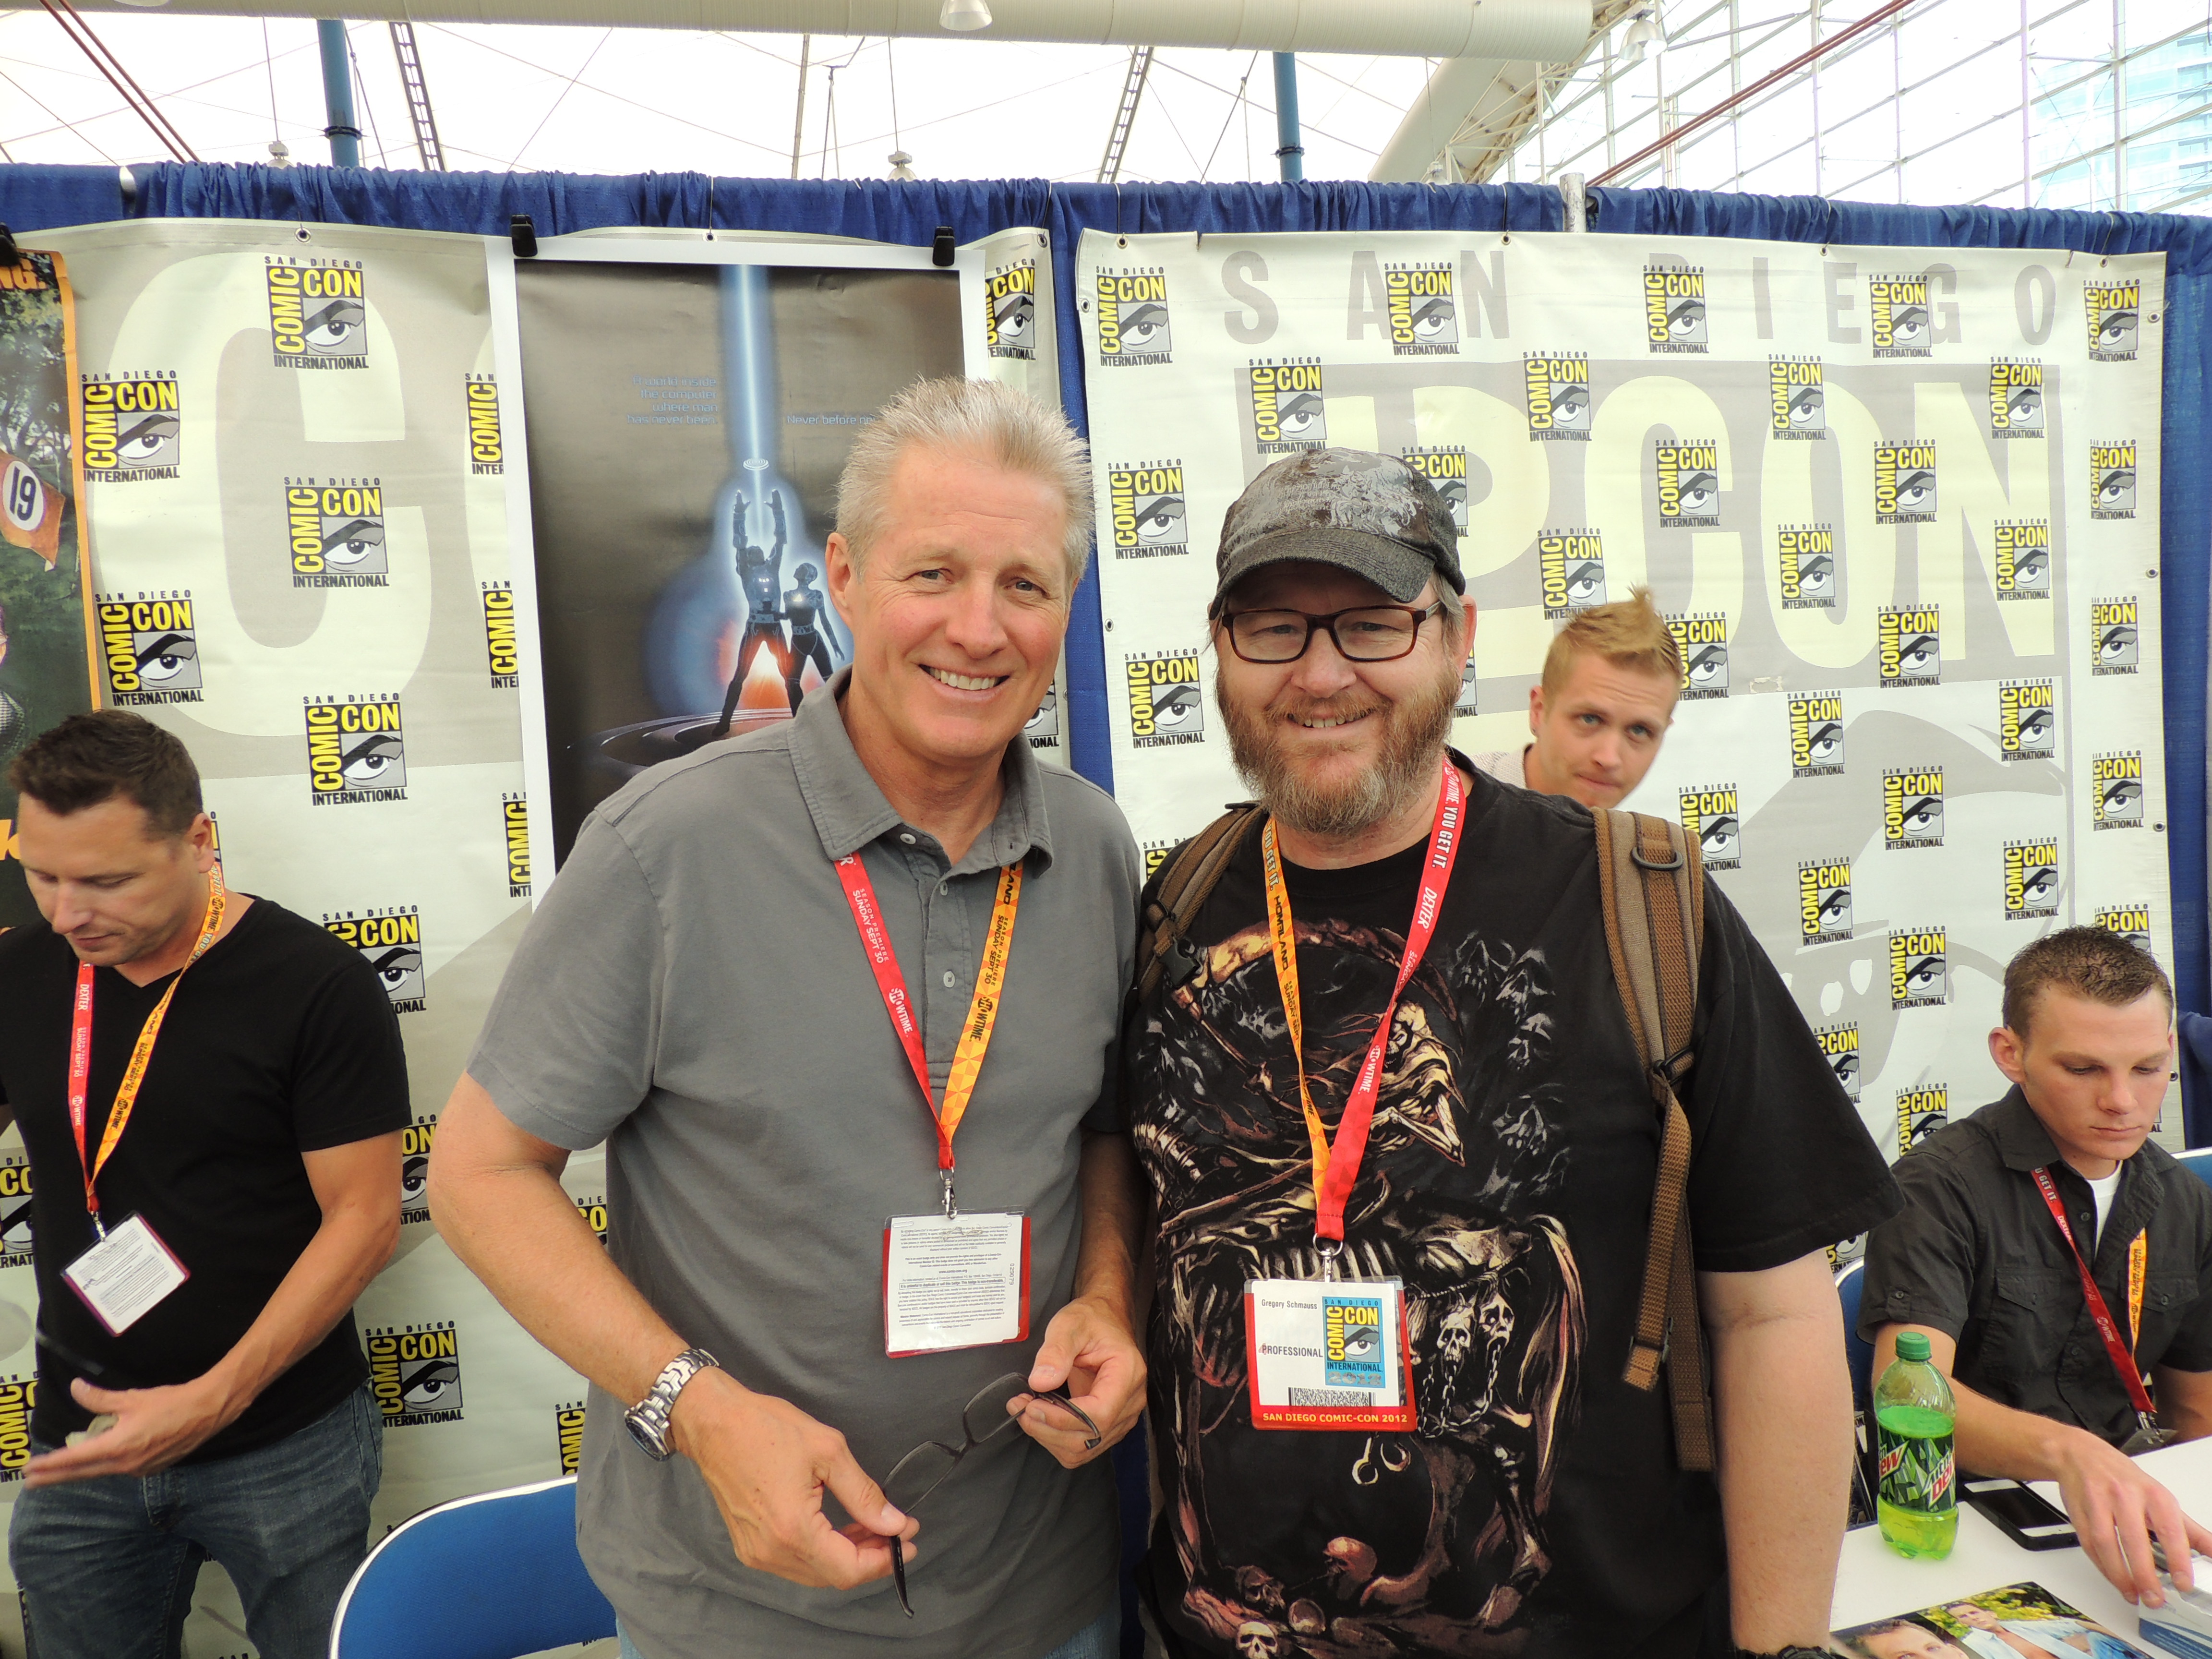 Bruce Boxleitner and Gregory Schmauss at the 2012 Comic-Con in San Diego, California.